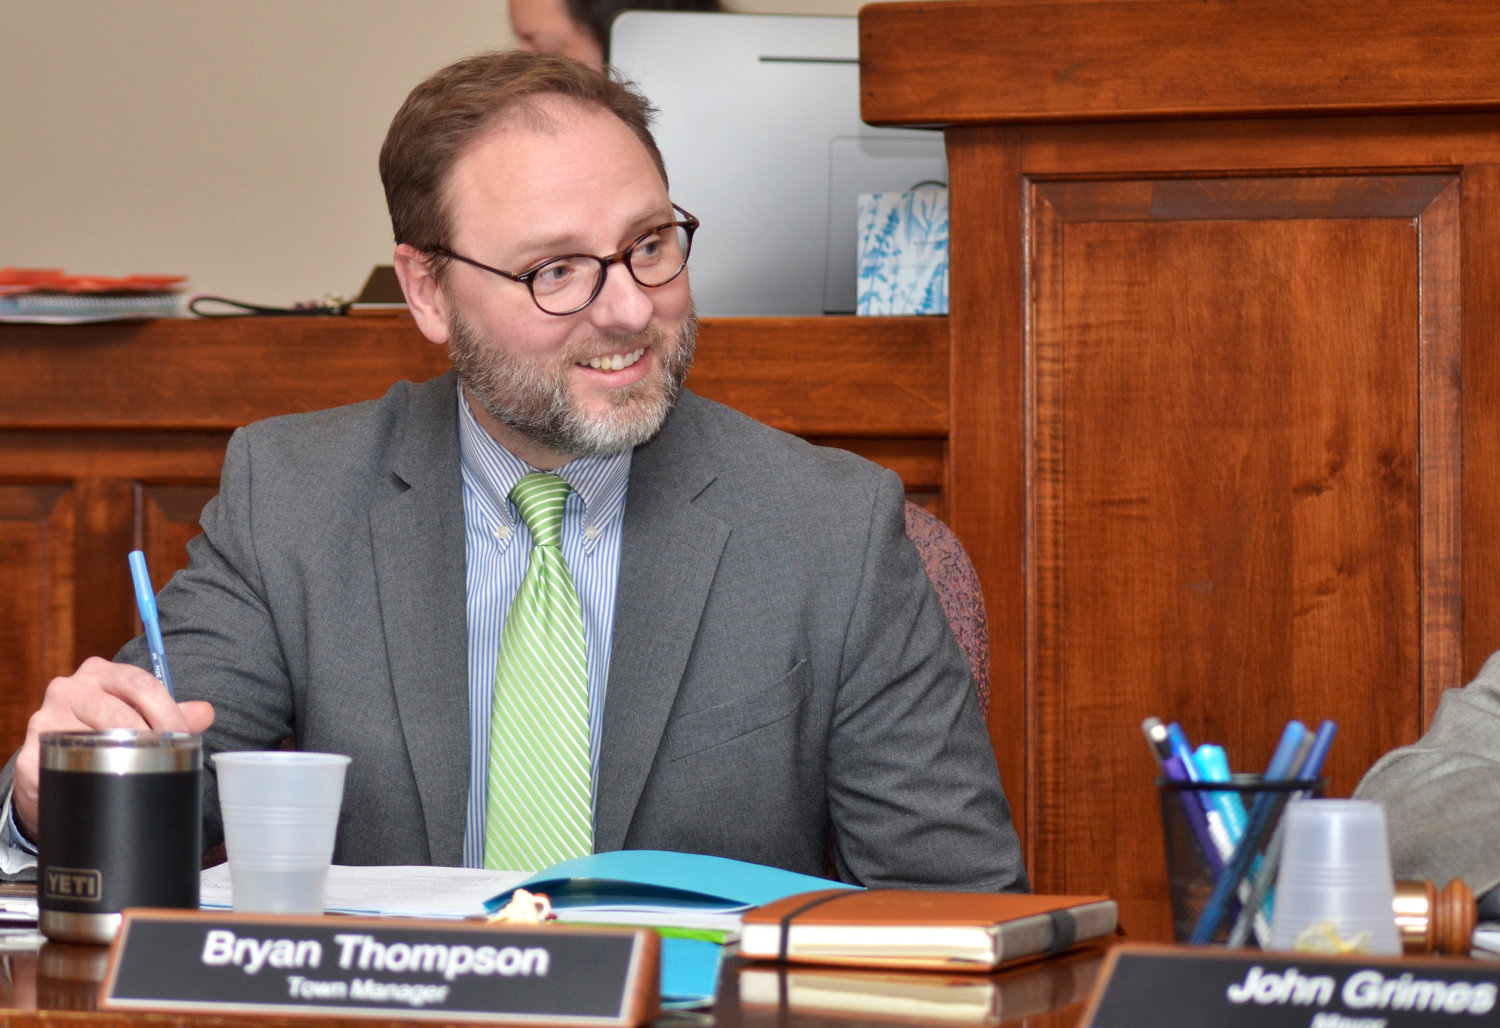 The two projects will be financed by $40 million of the approved limited obligation proposal, Assistant County Manager Bryan Thompson told the News + Record.